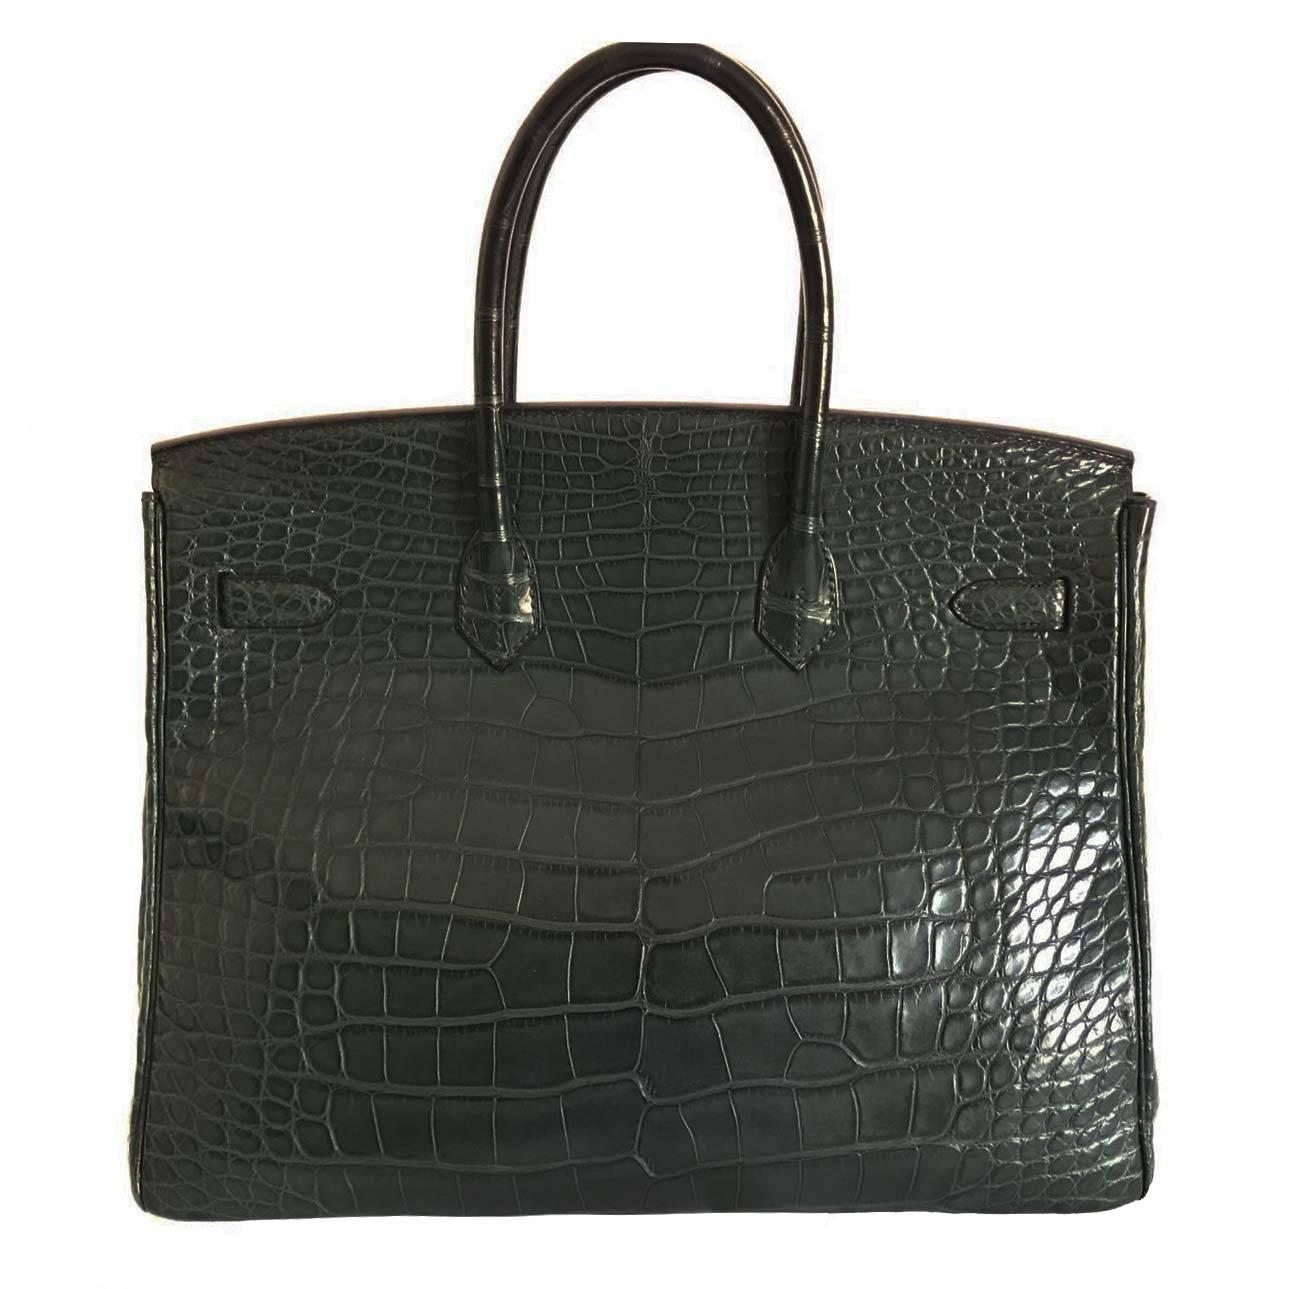 Very Rare Hermes Birkin 35 Alligator Vert Titien PHW
Comes with invoice and cites. This extremely rare and highly coveted bag comes in a good preloved condition. 